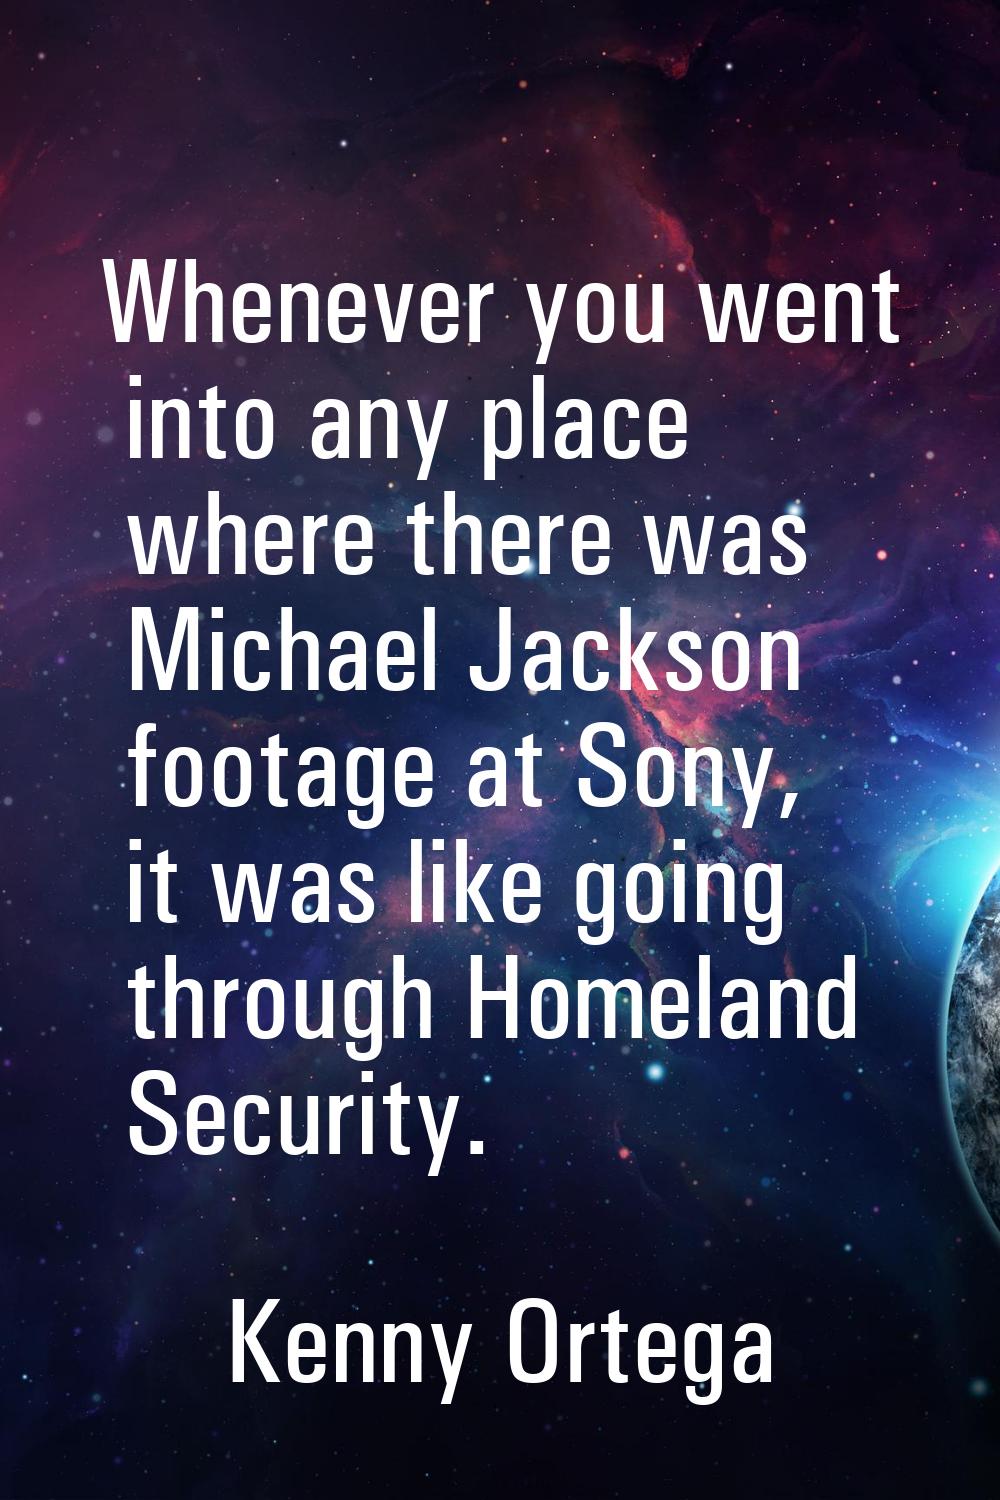 Whenever you went into any place where there was Michael Jackson footage at Sony, it was like going